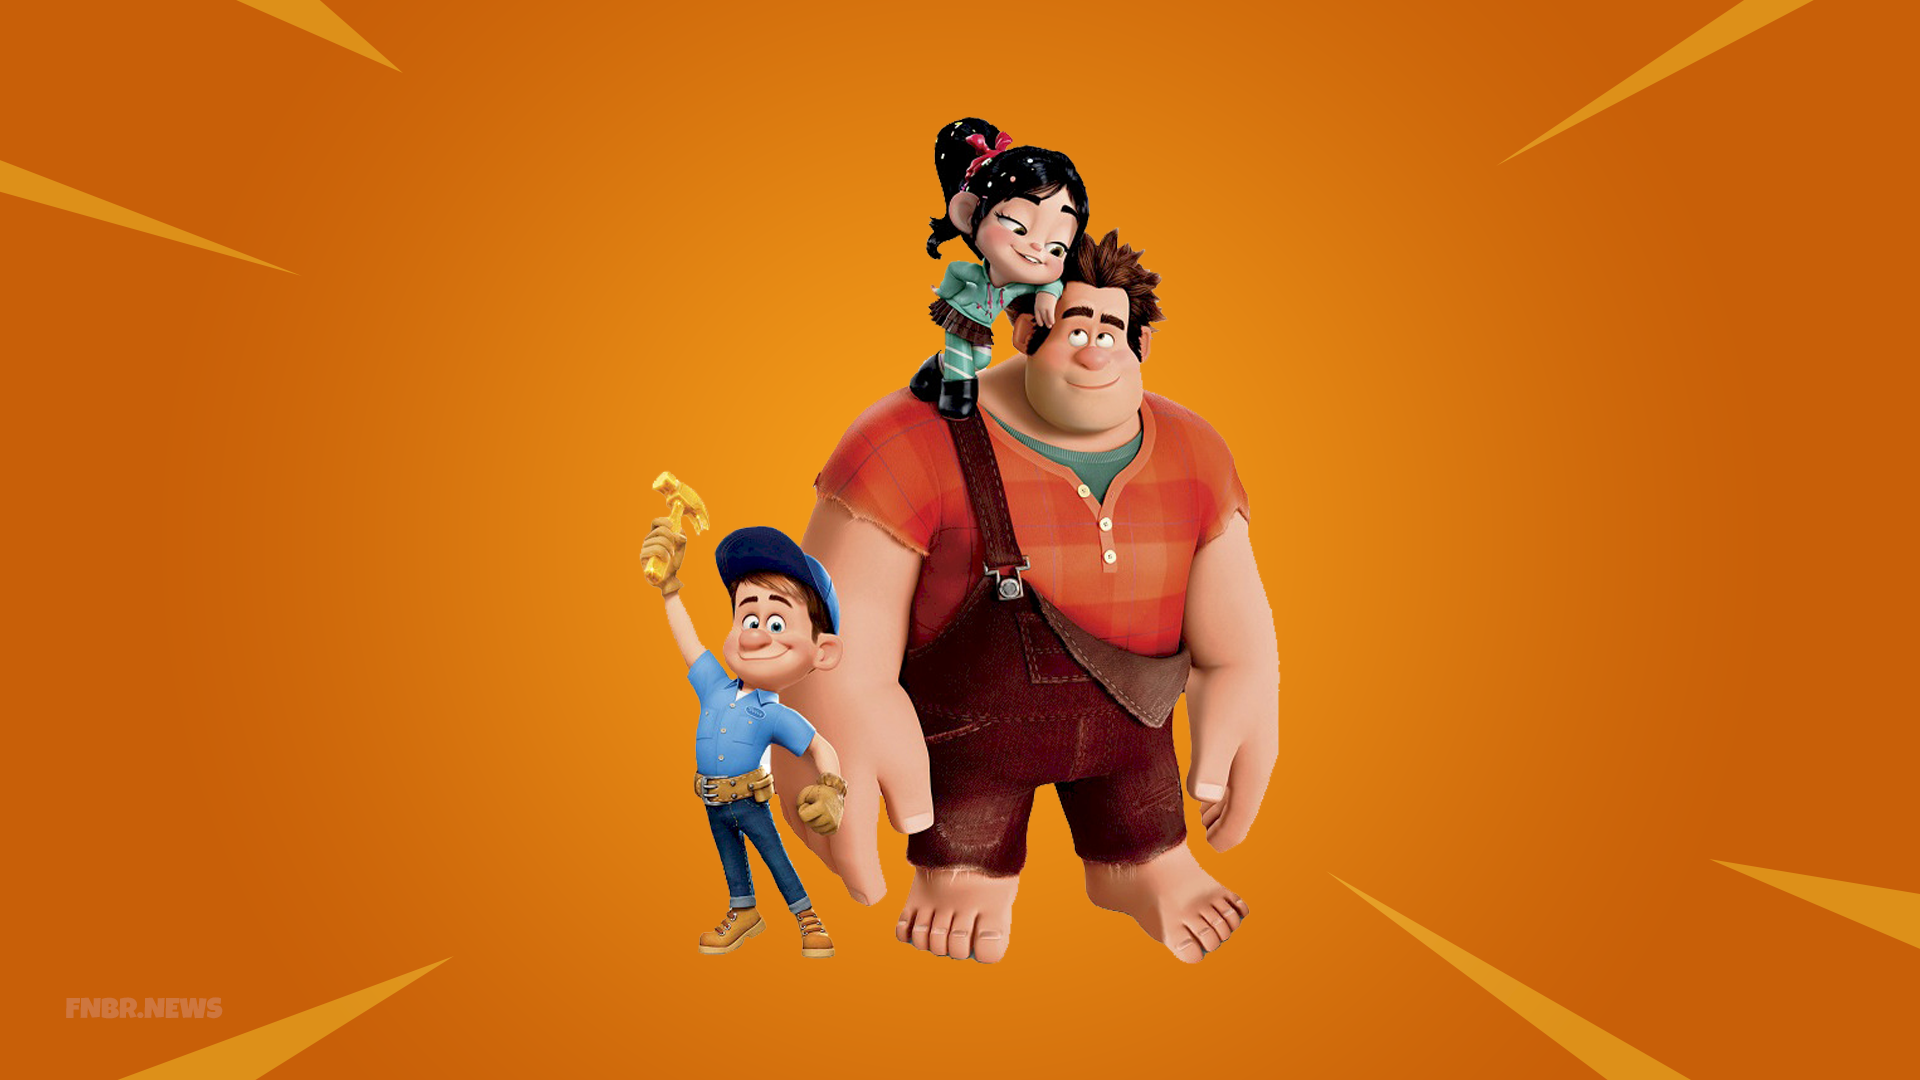 Wreck-It-Ralph Might Be Coming to Fortnite